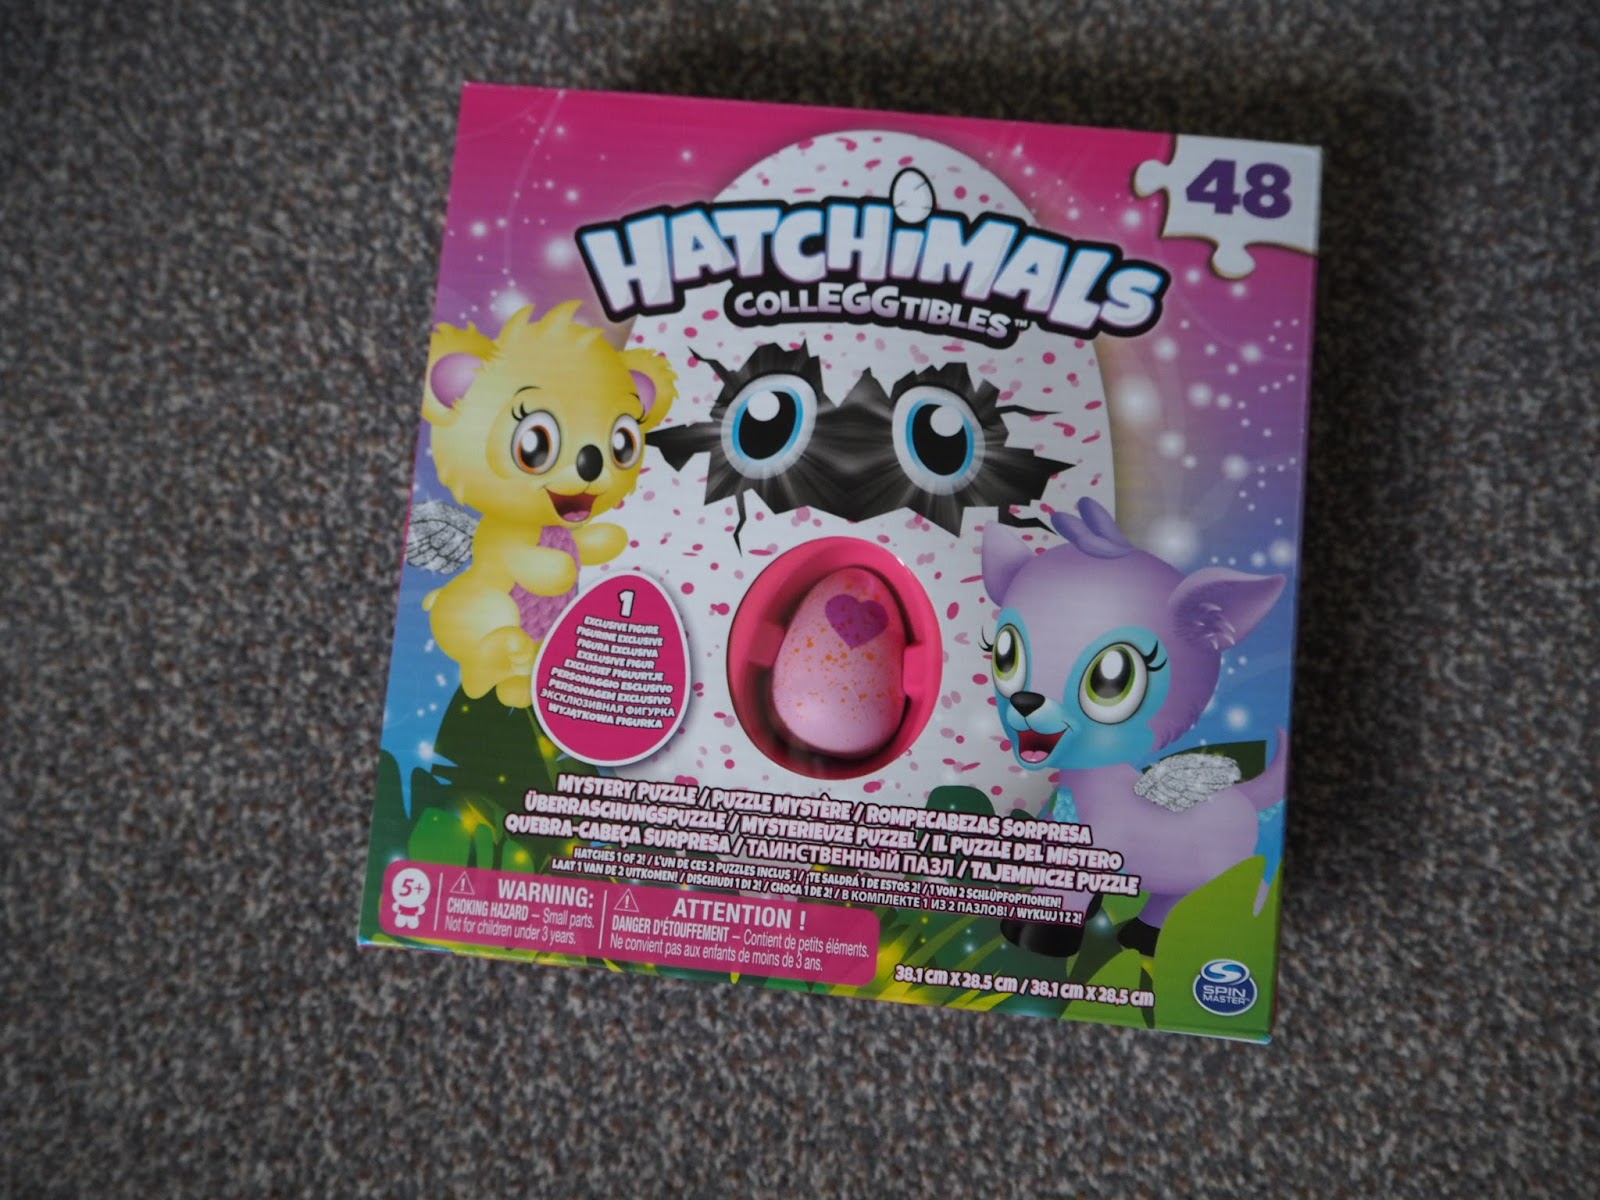 Hatchimal CollEGGtibles Mystery Puzzle Review